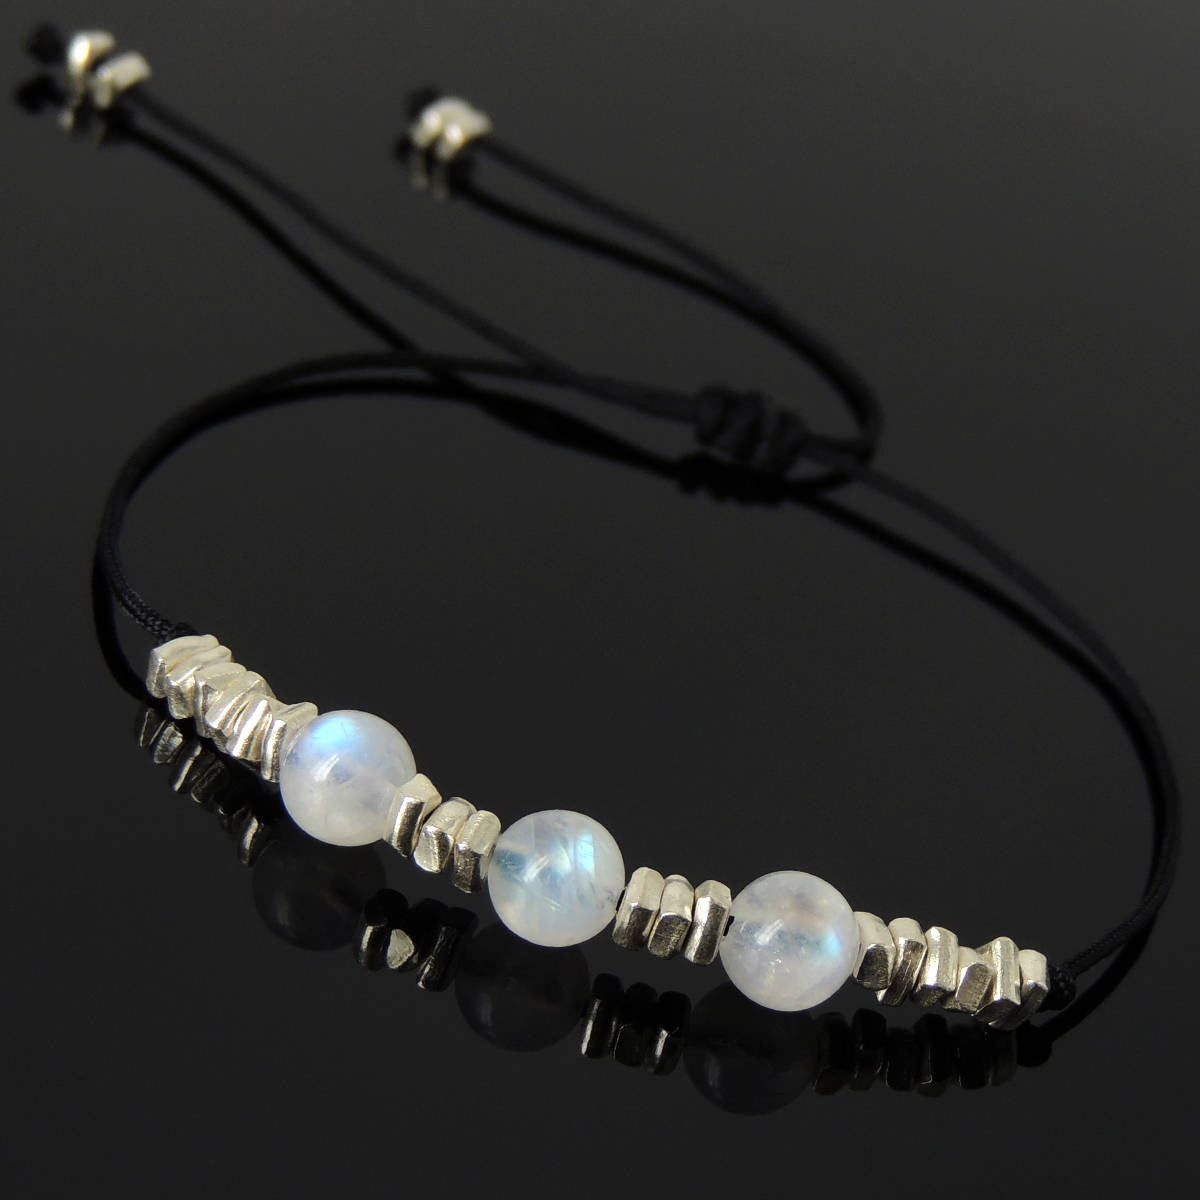 6mm Grade AA Moonstone Adjustable Braided Gemstone Bracelet with S925 Sterling Silver Nugget Beads - Handmade by Gem & Silver BR1121